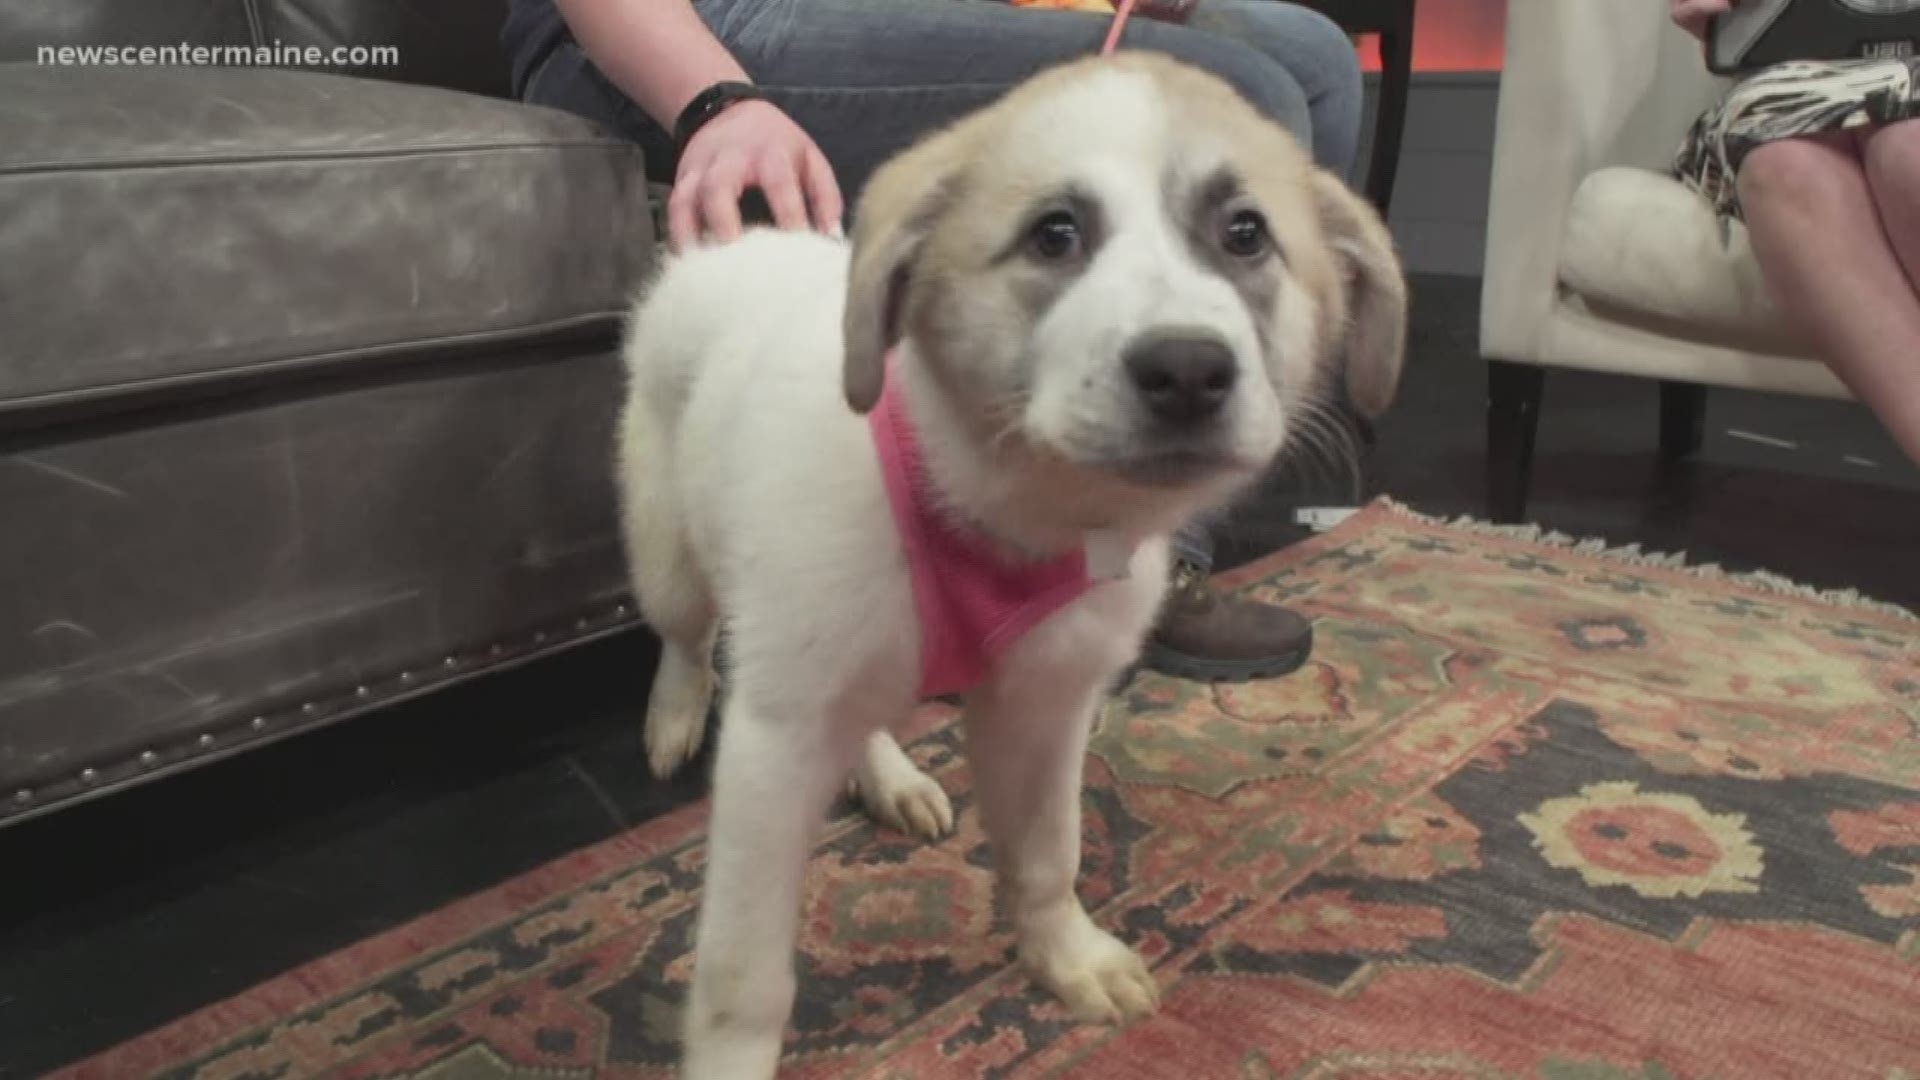 Dosie is available for adoption at Midcoast Humane